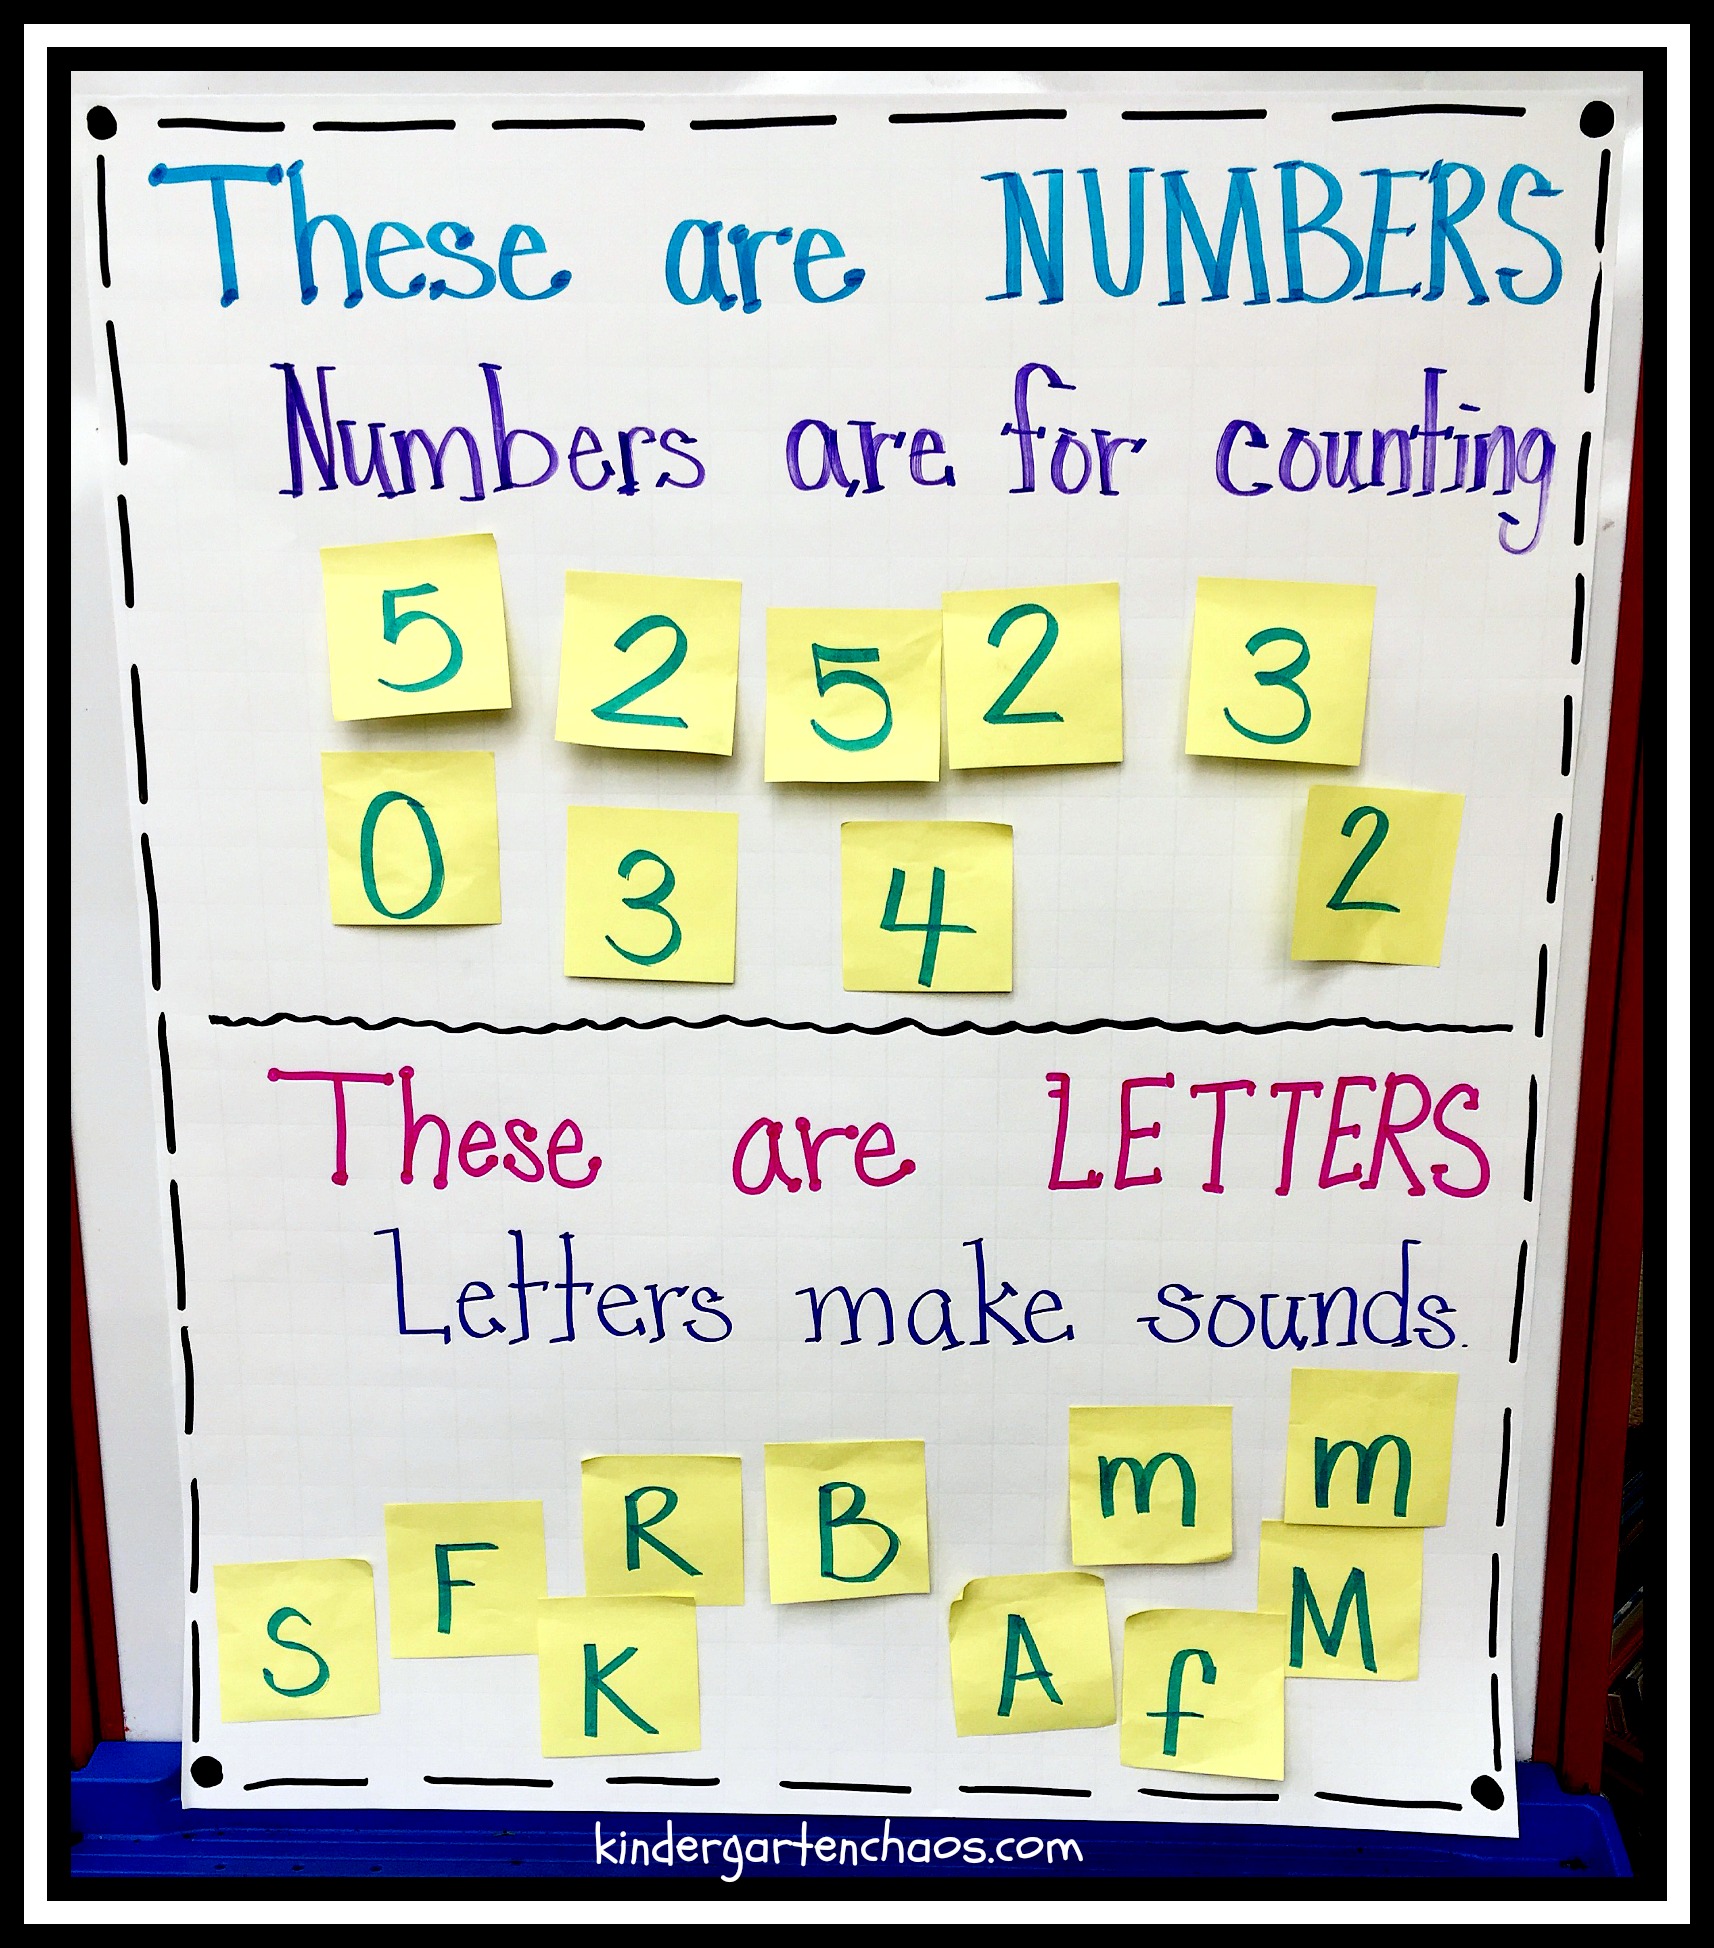 difference-between-numbers-and-letters-anchor-chart-kindergartenchaos